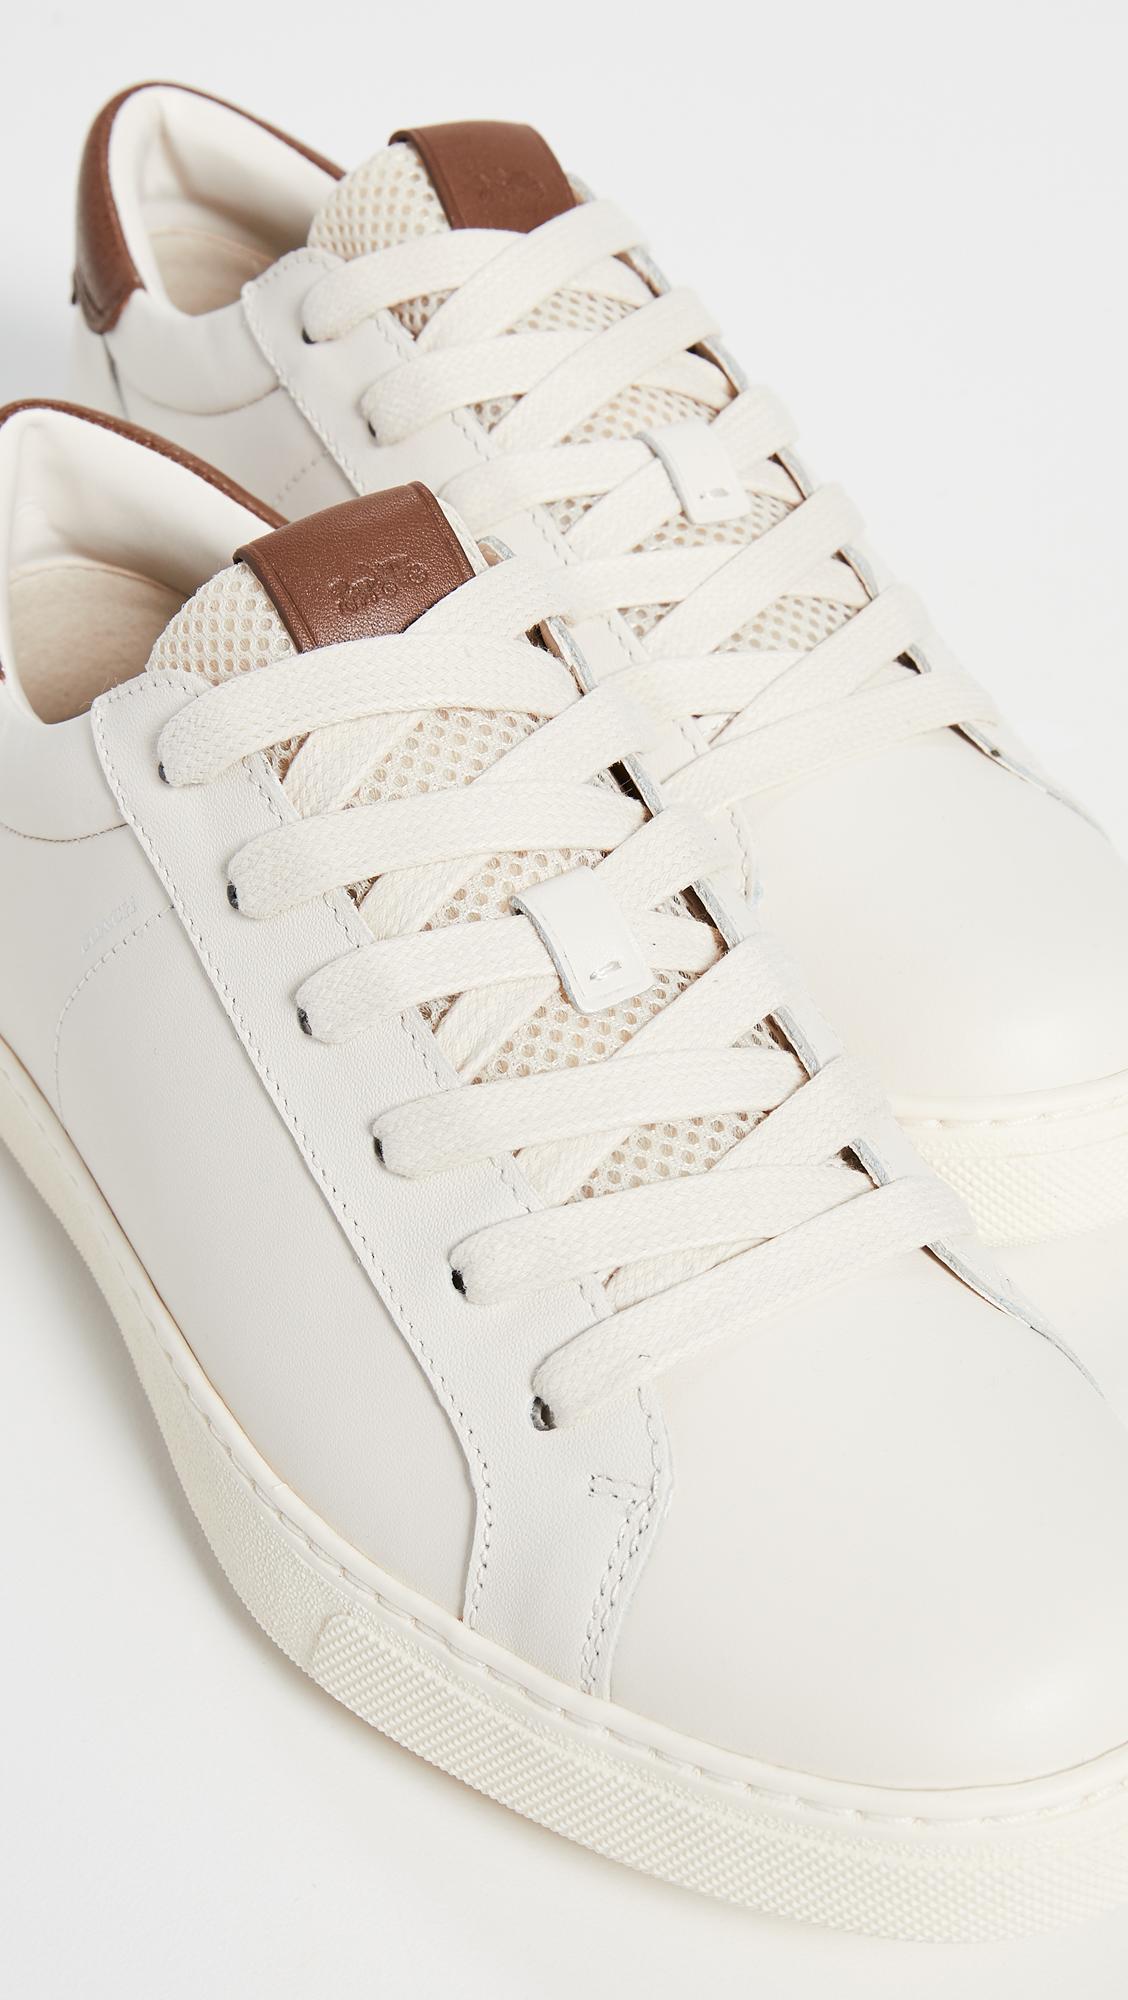 COACH Leather C126 Low Top Sneakers in White for Men - Lyst